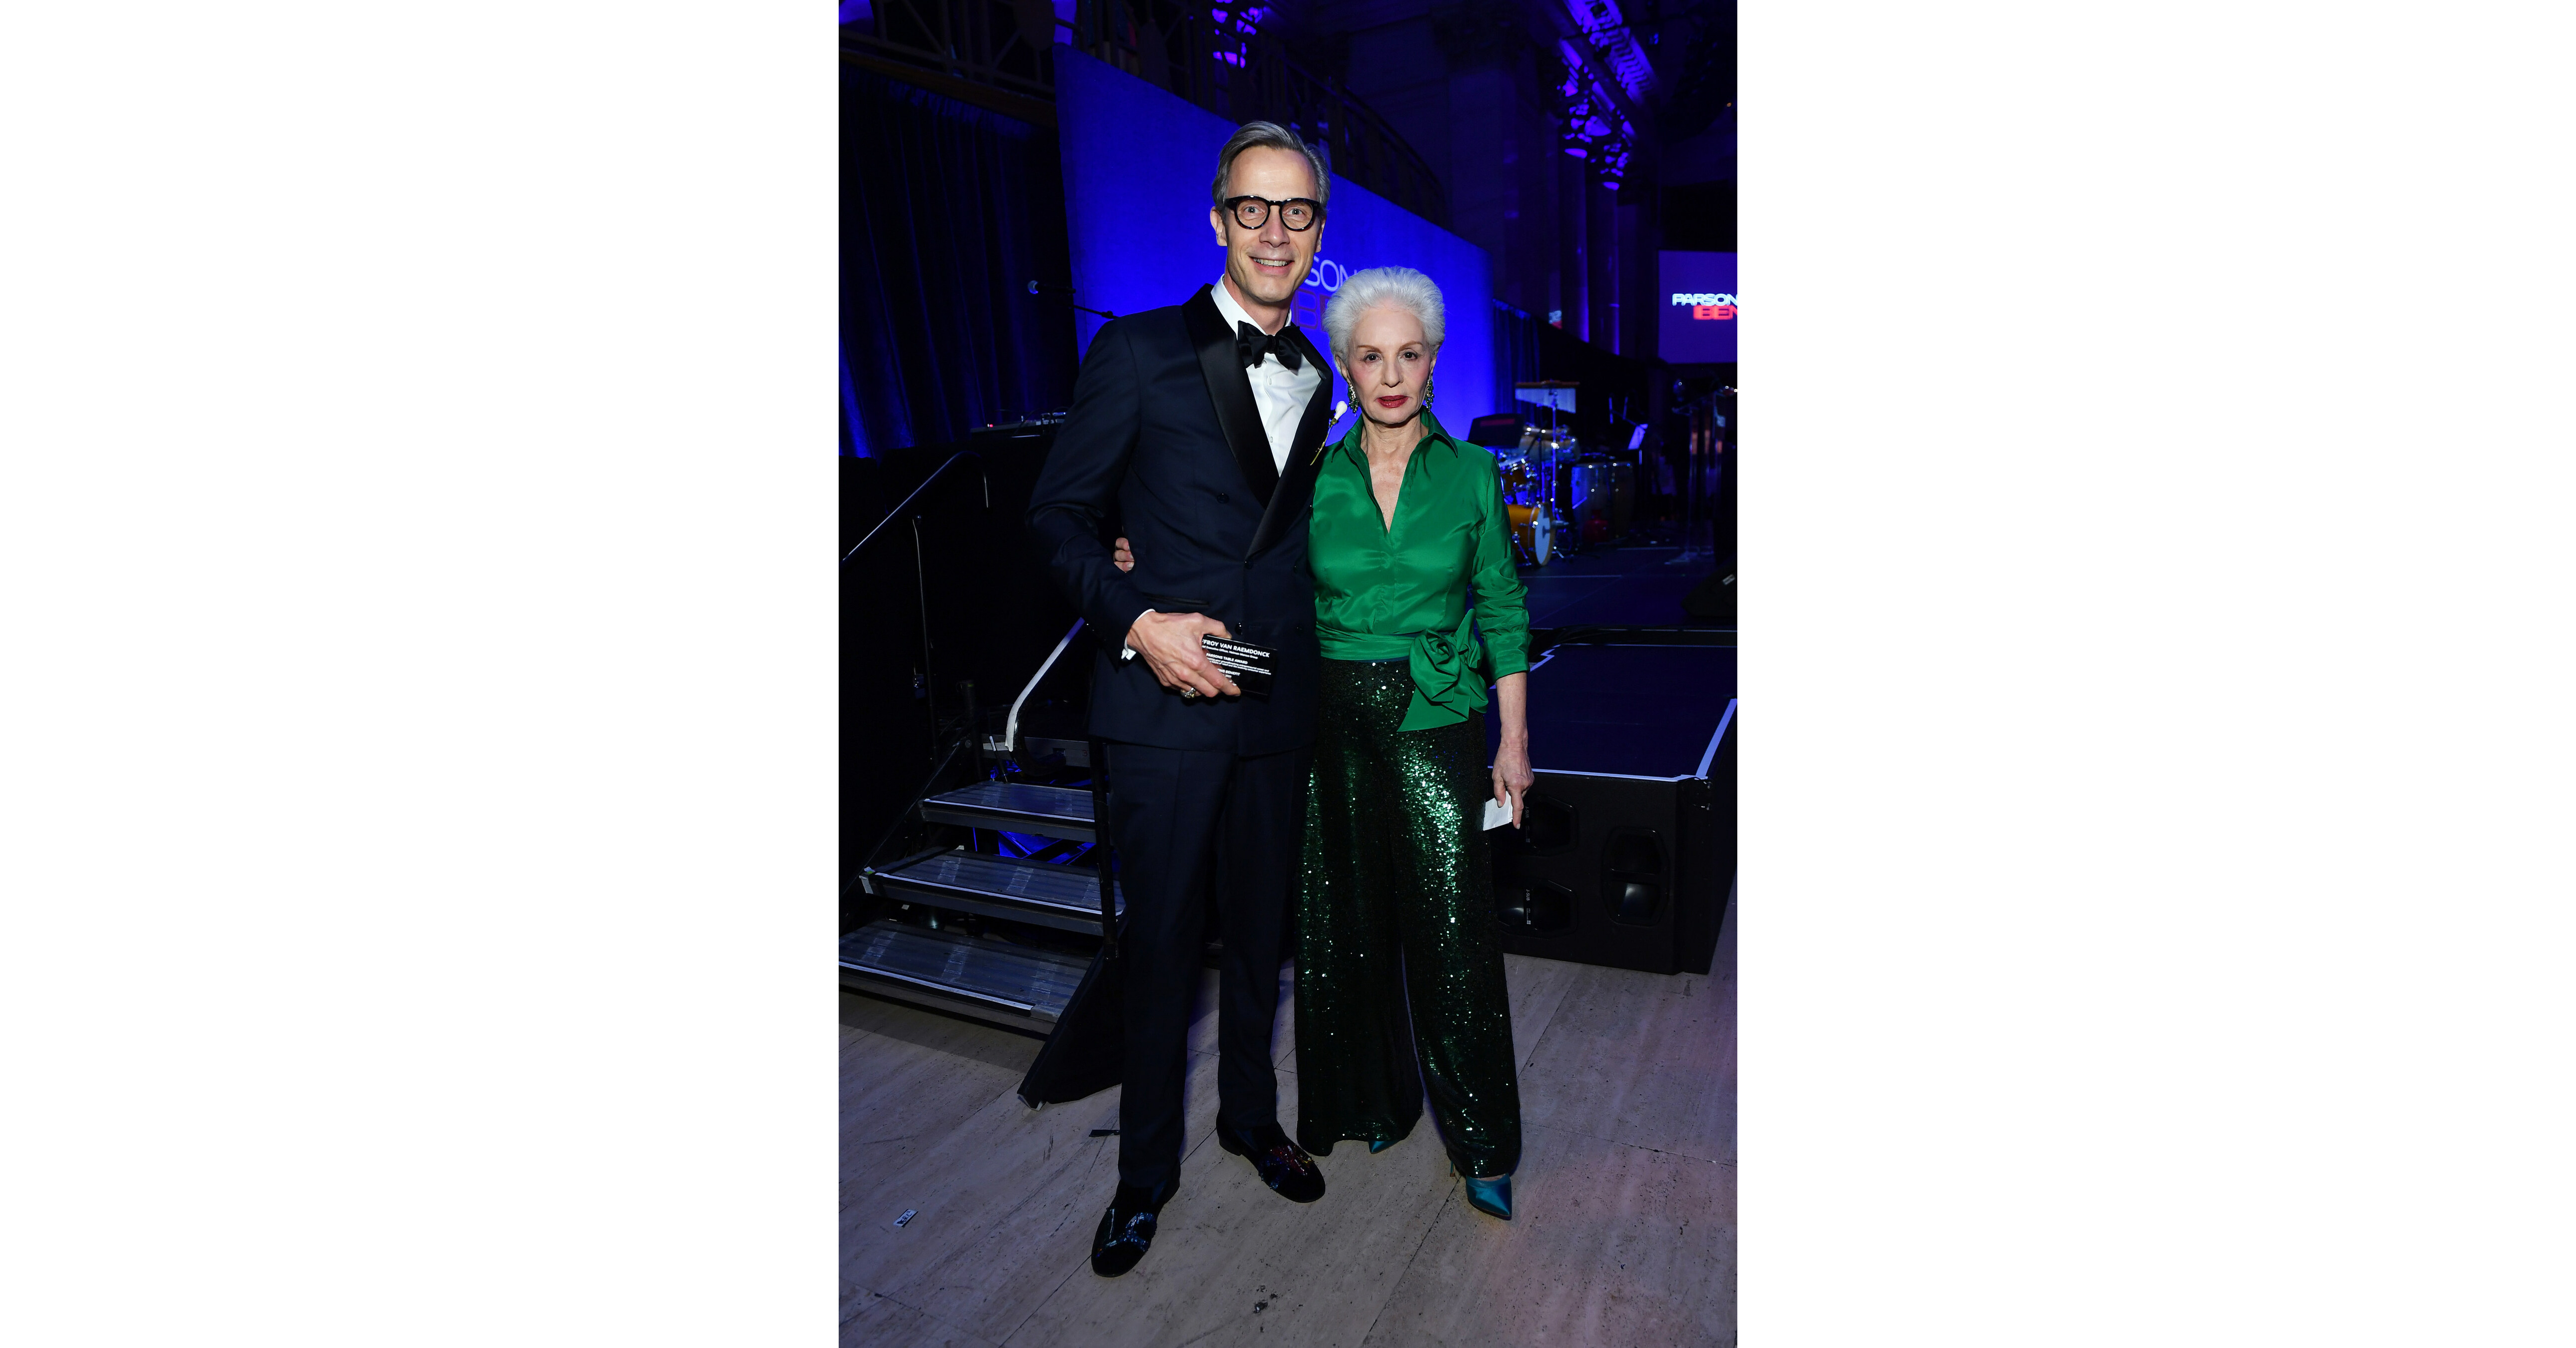 Neiman Marcus Group CEO Geoffroy van Raemdonck Honored with the